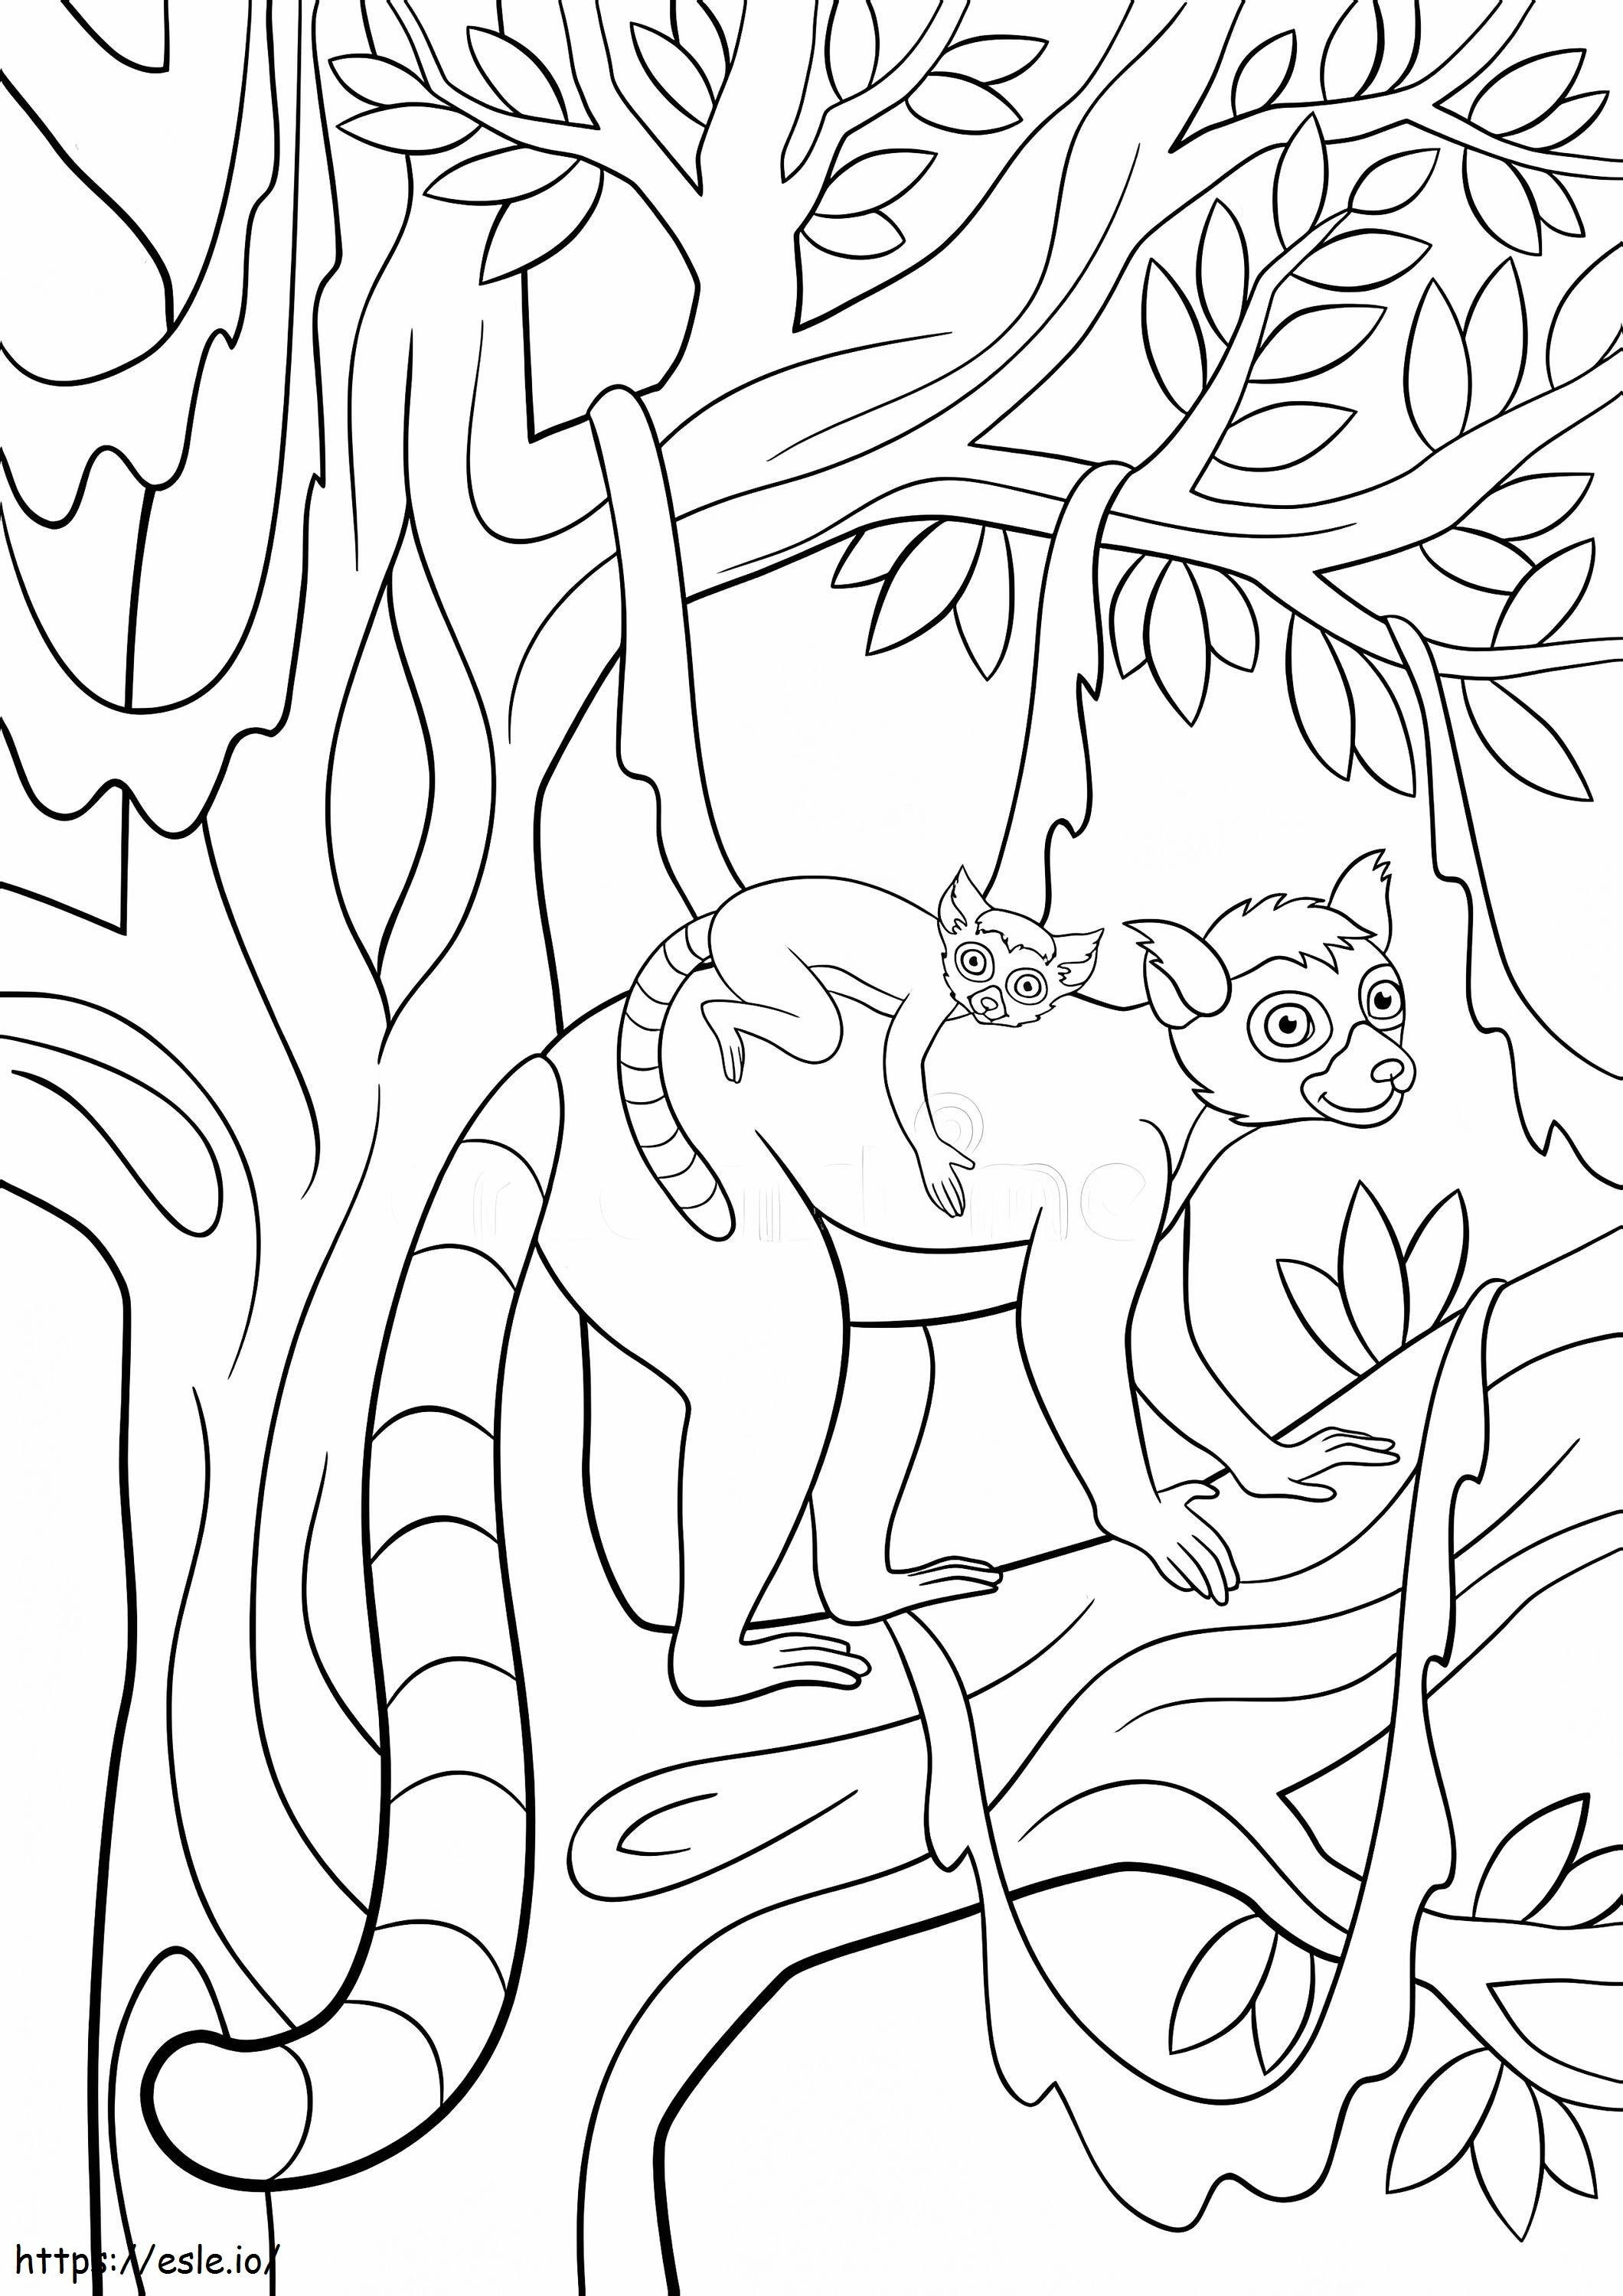 Mother Lemur With Her Cute Little Baby coloring page